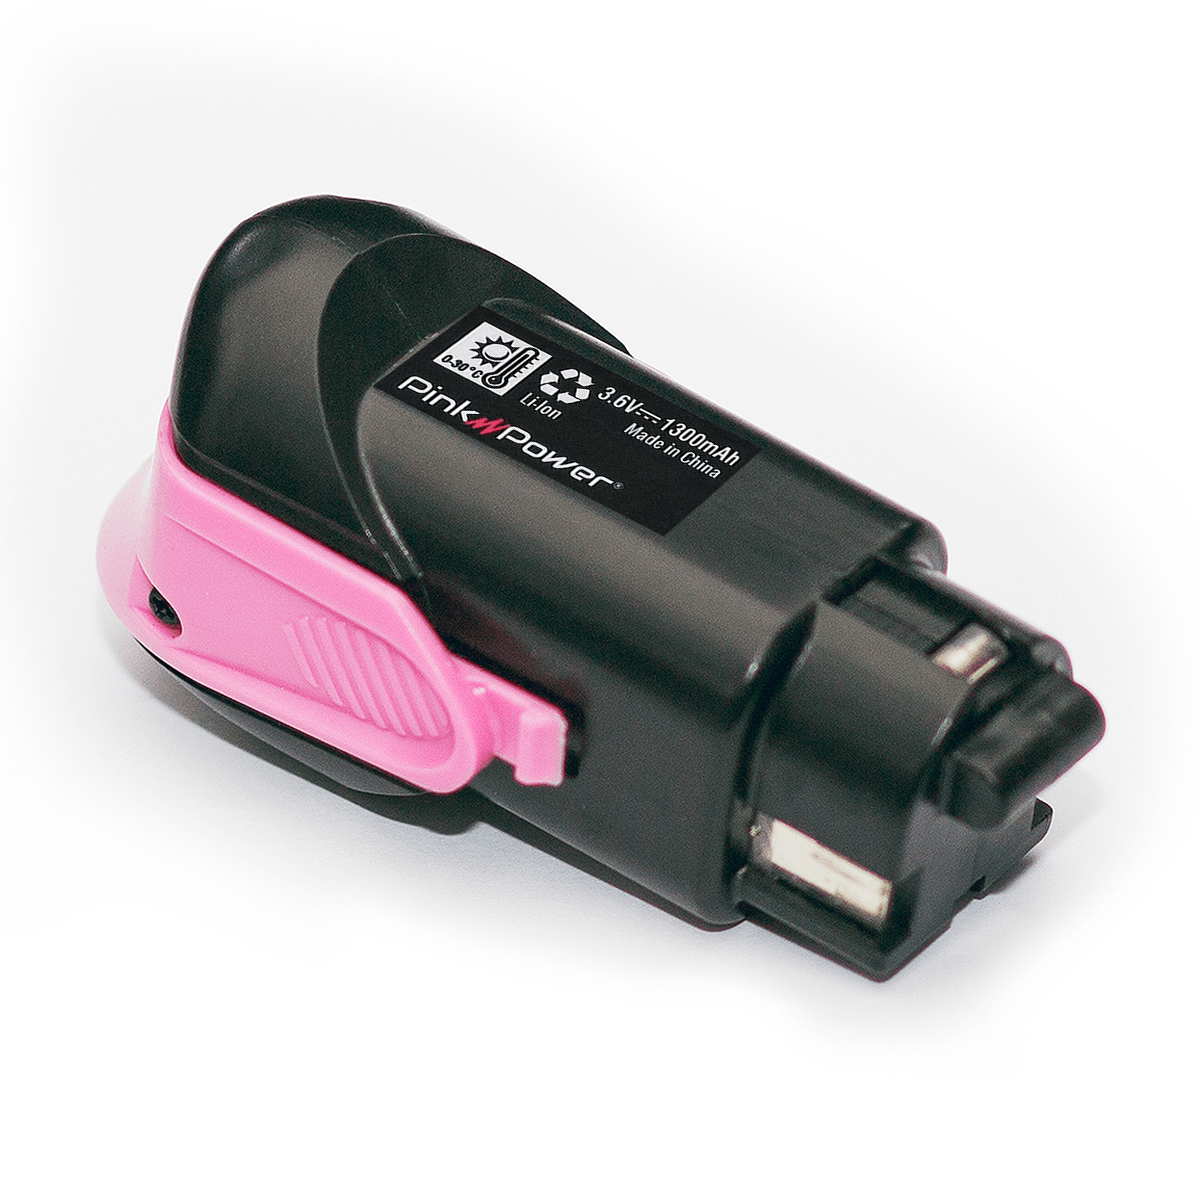 4V PINK REPLACEMENT BATTERY FOR HG2043 CORDLESS SCISSORS Craft Accessory Pink Power 